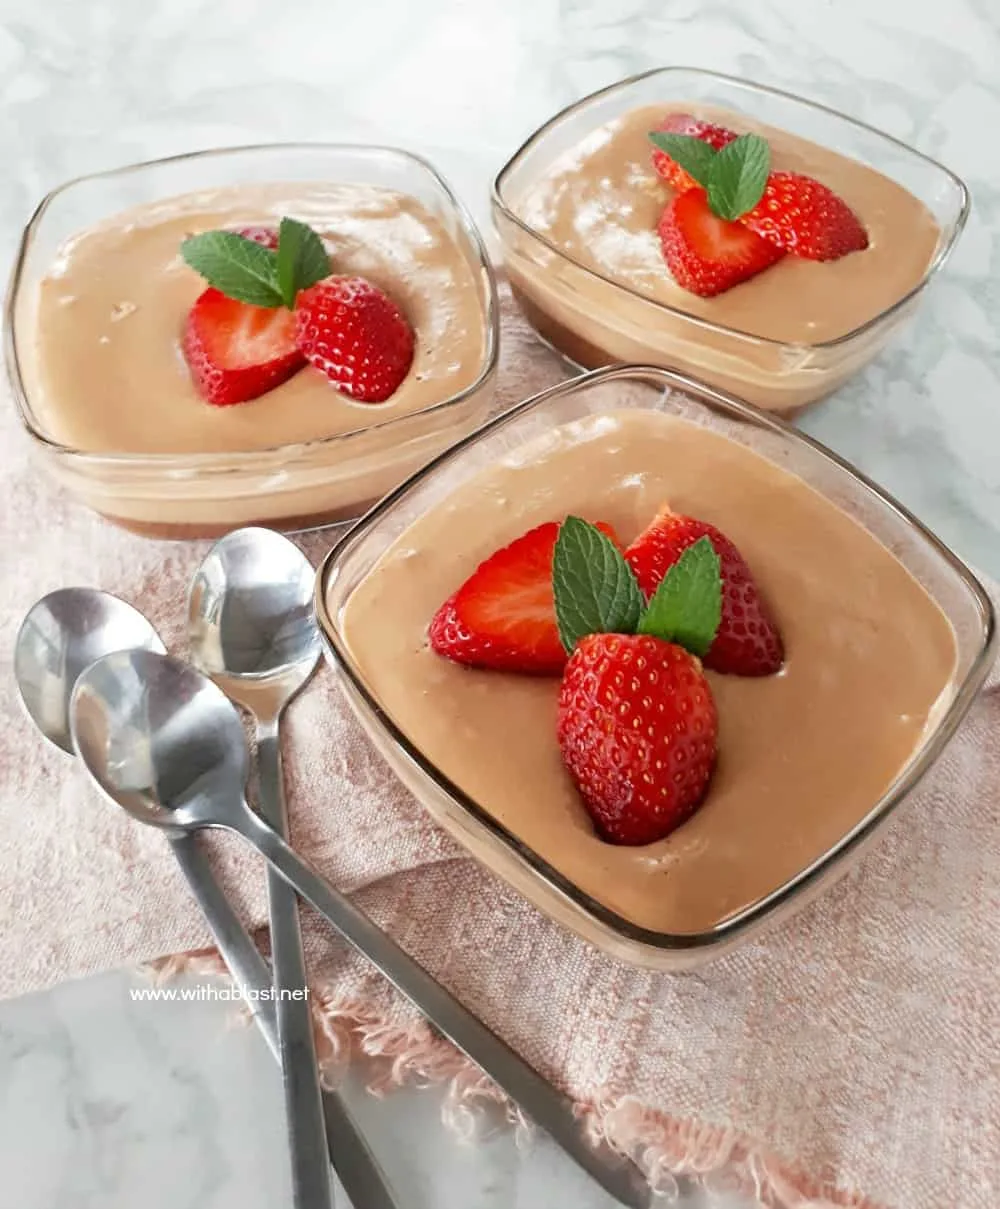 Chocolate Coconut Rum Desserts have a slightly chewy bottom layer with a smooth, creamy top layer and a hint of Rum throughout the dessert